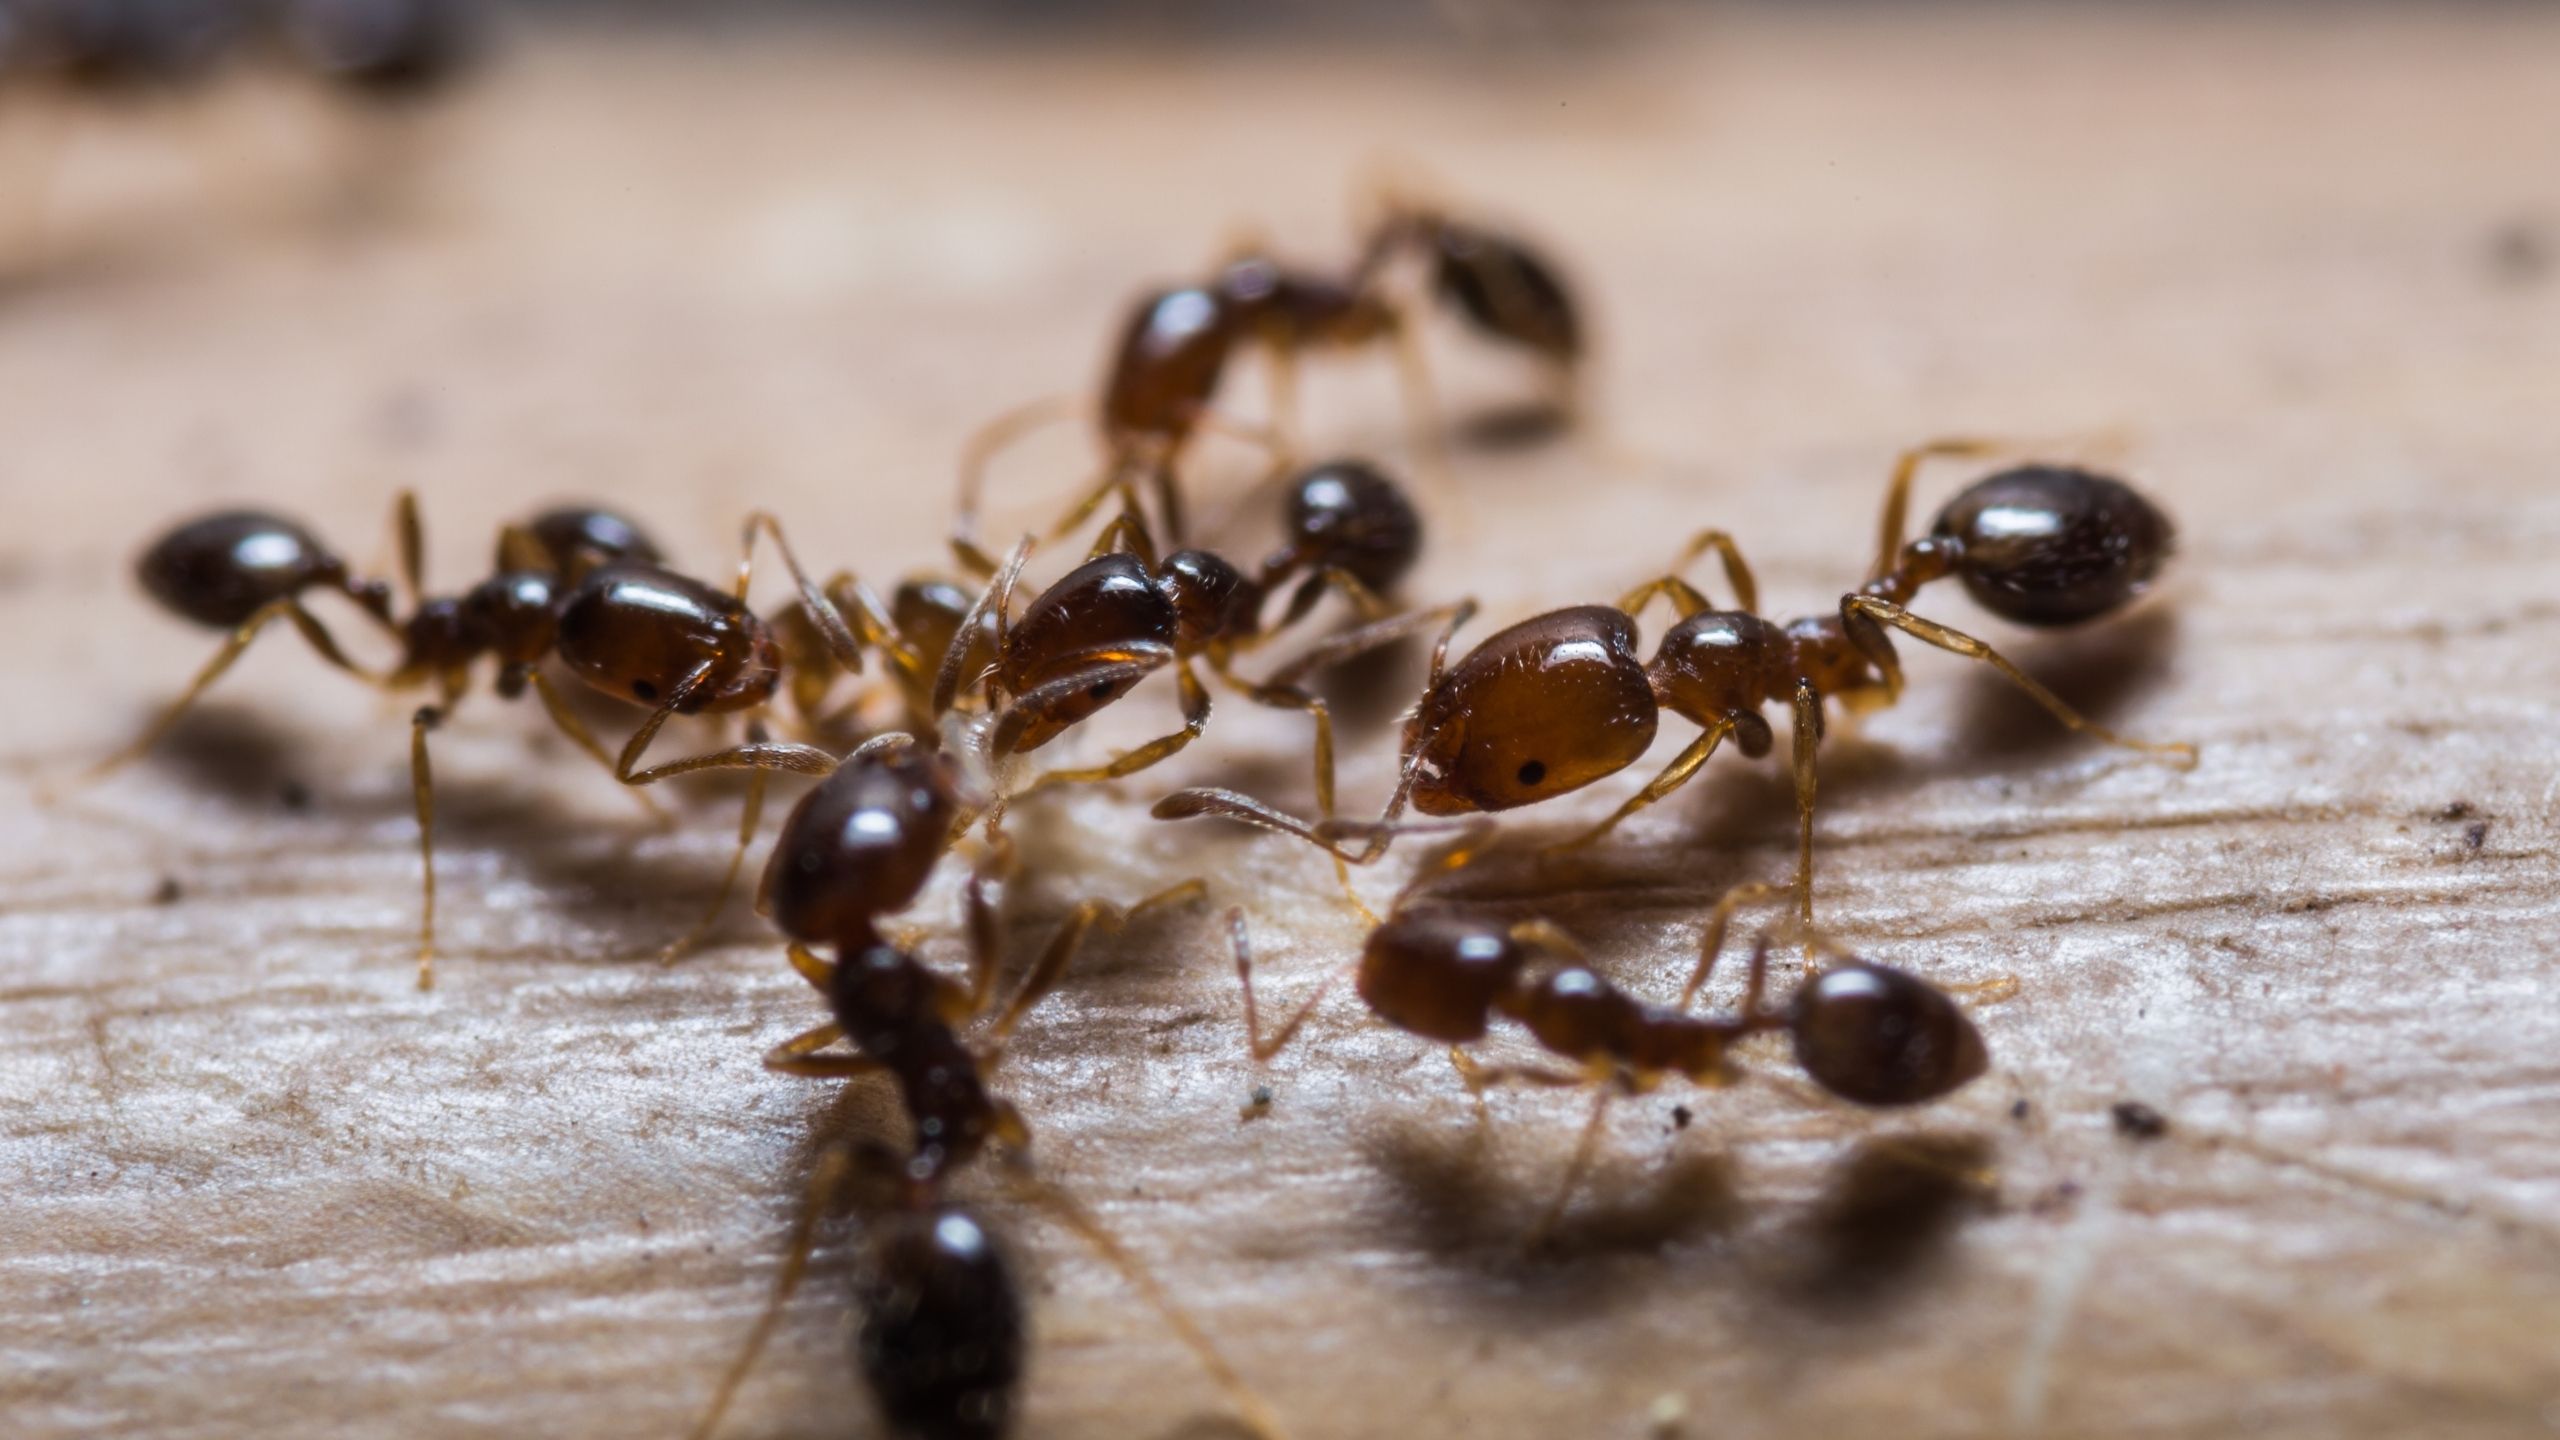 Red imported fire ant (IFA) workers swarming a boot.